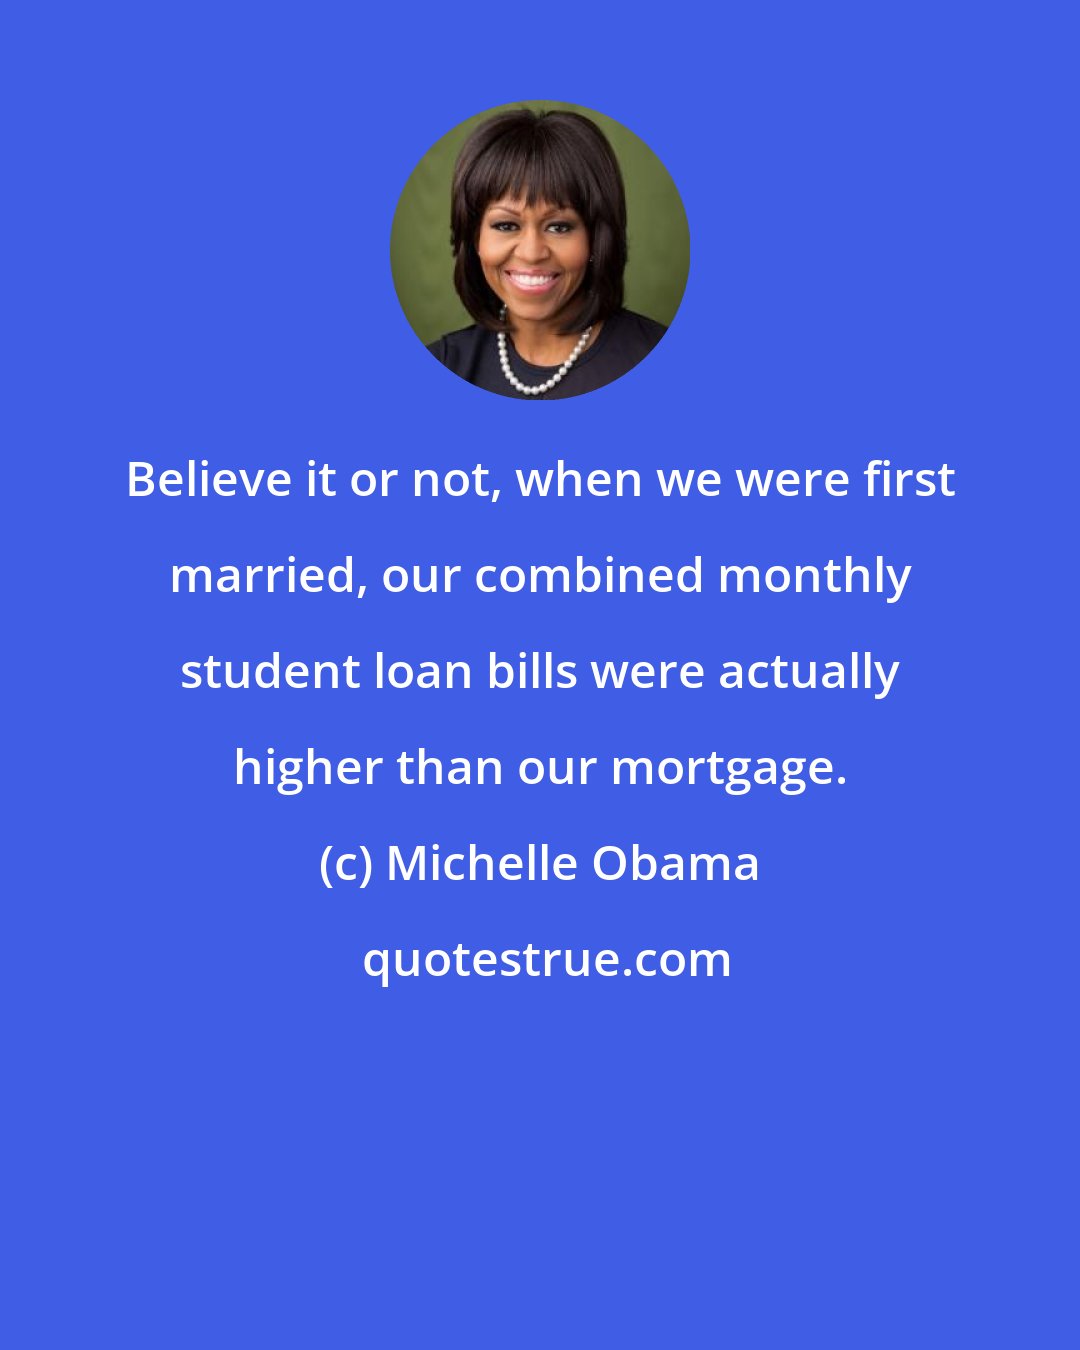 Michelle Obama: Believe it or not, when we were first married, our combined monthly student loan bills were actually higher than our mortgage.